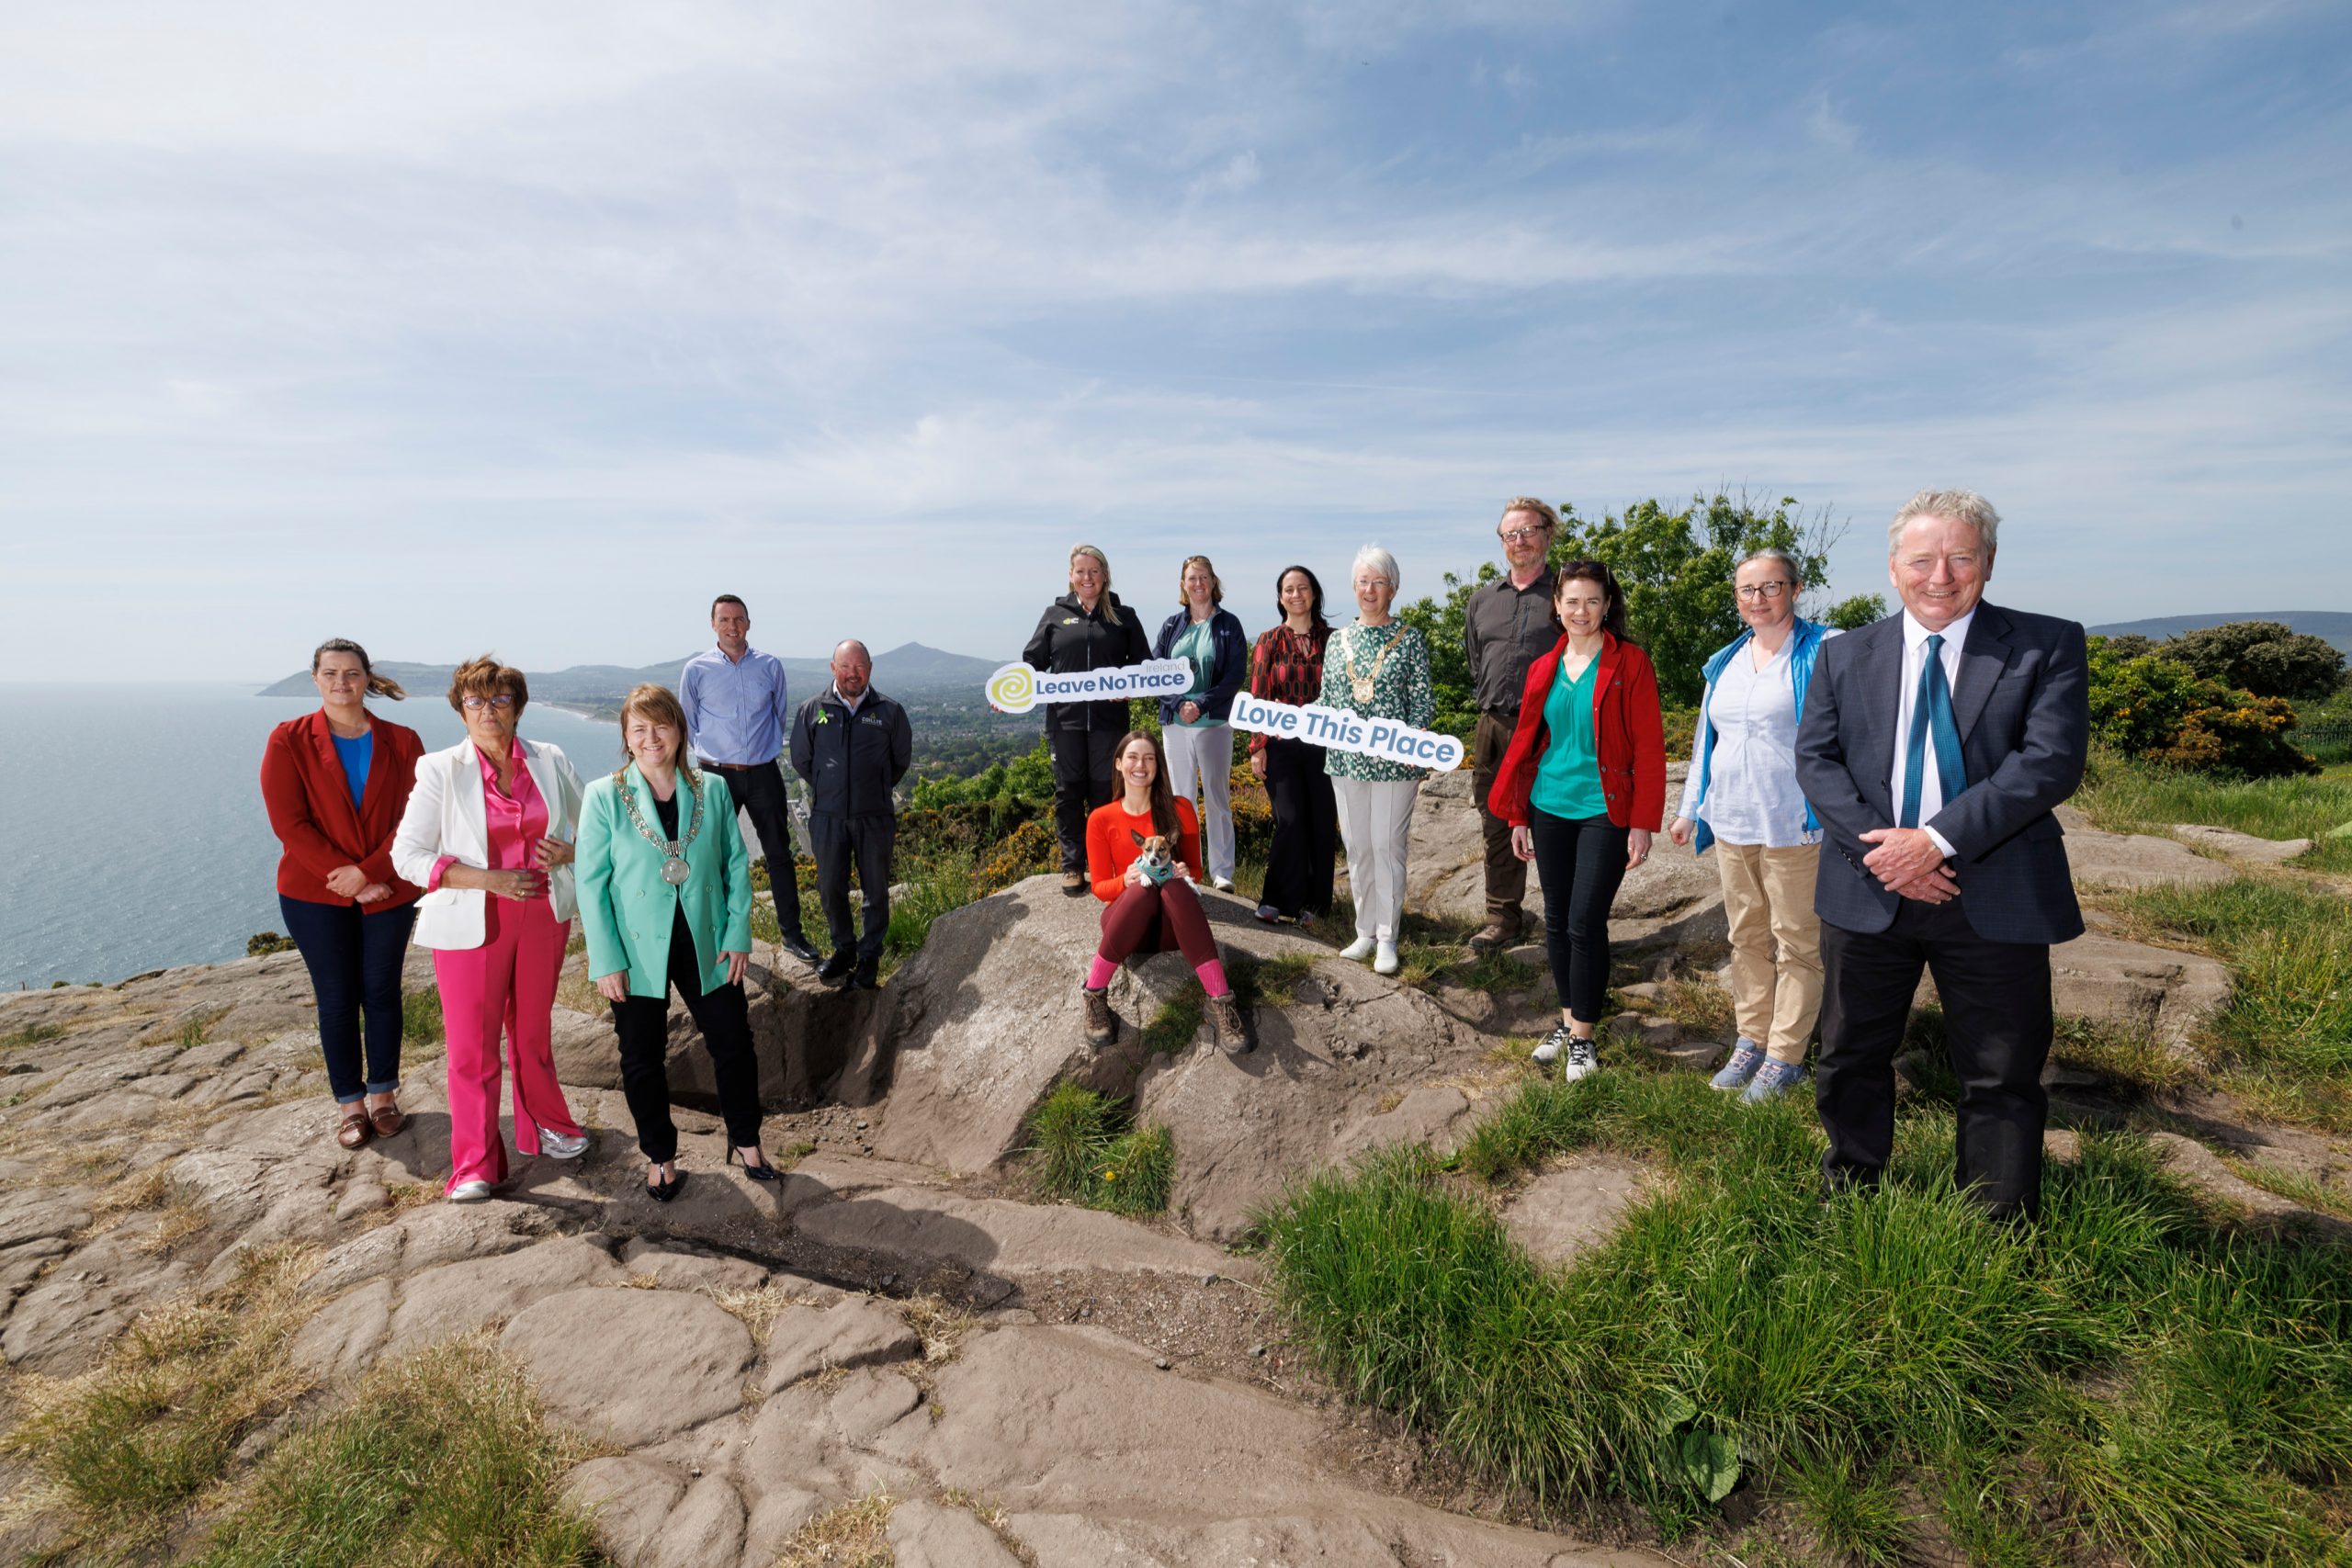 Leave No Trace Ireland launches ‘Love This Place’ Awareness Campaign for 2023 urging care and respect for our outdoor spaces.